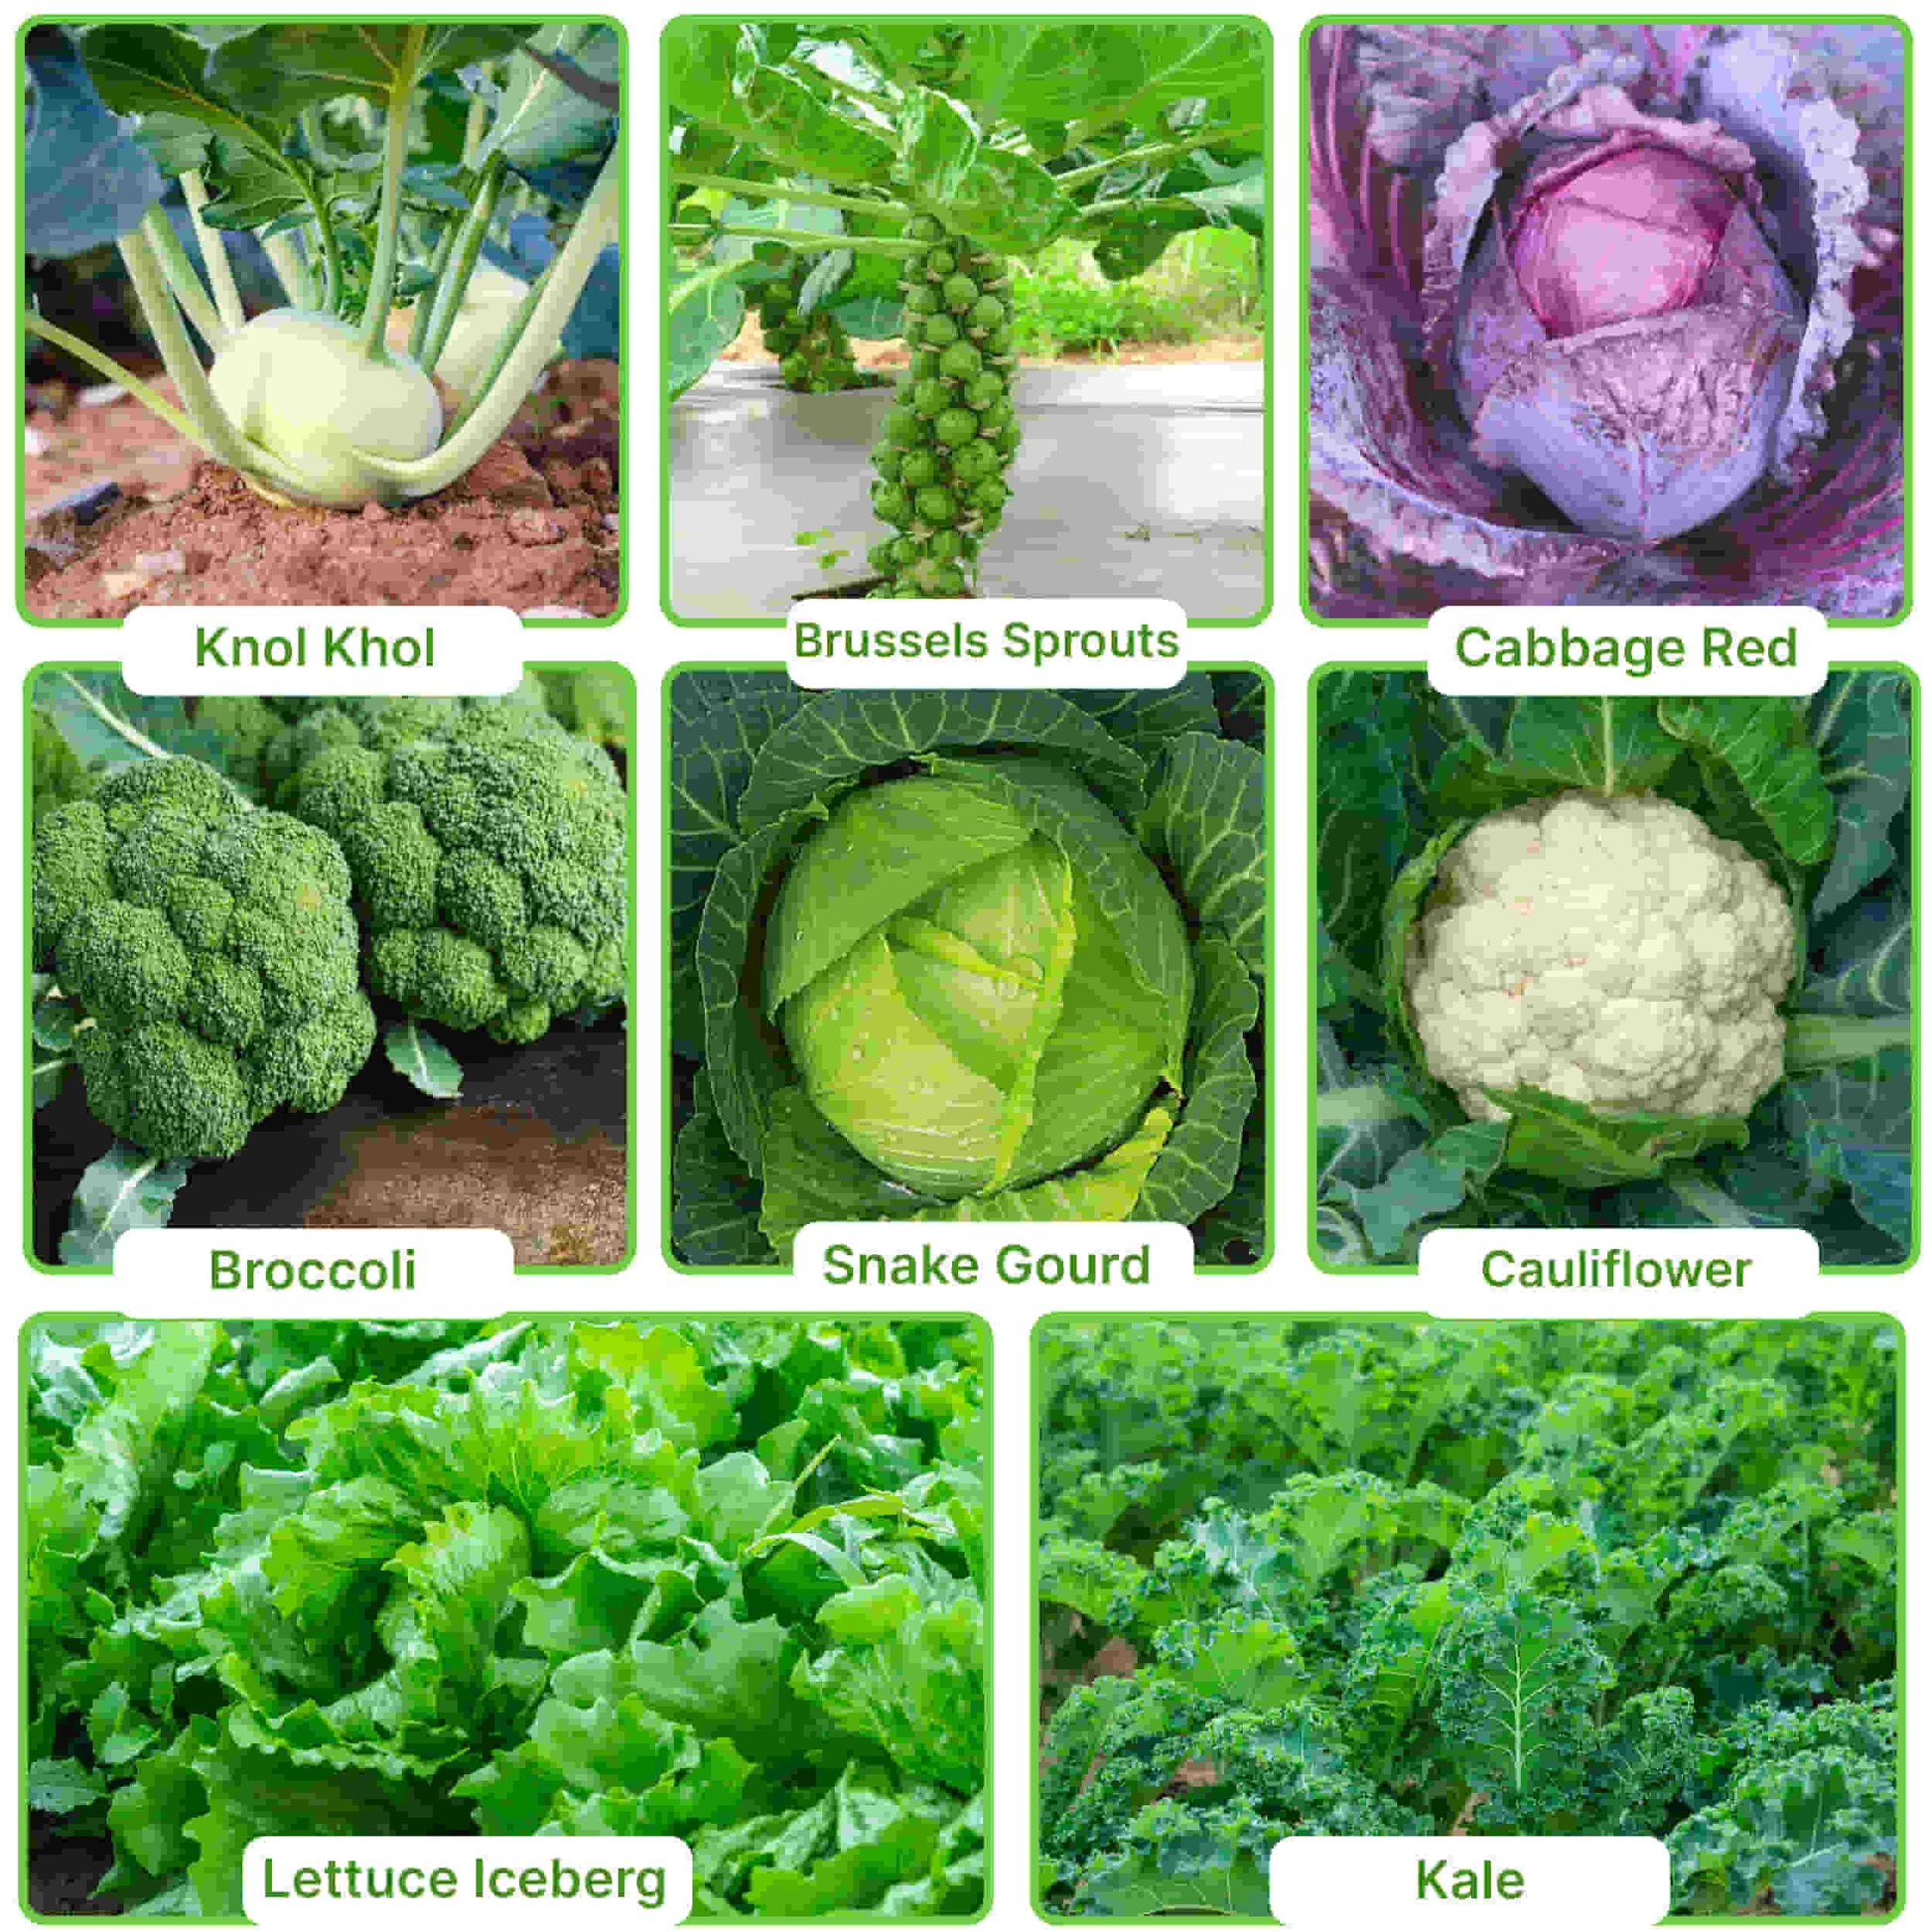 Cabbage Vegetable with names